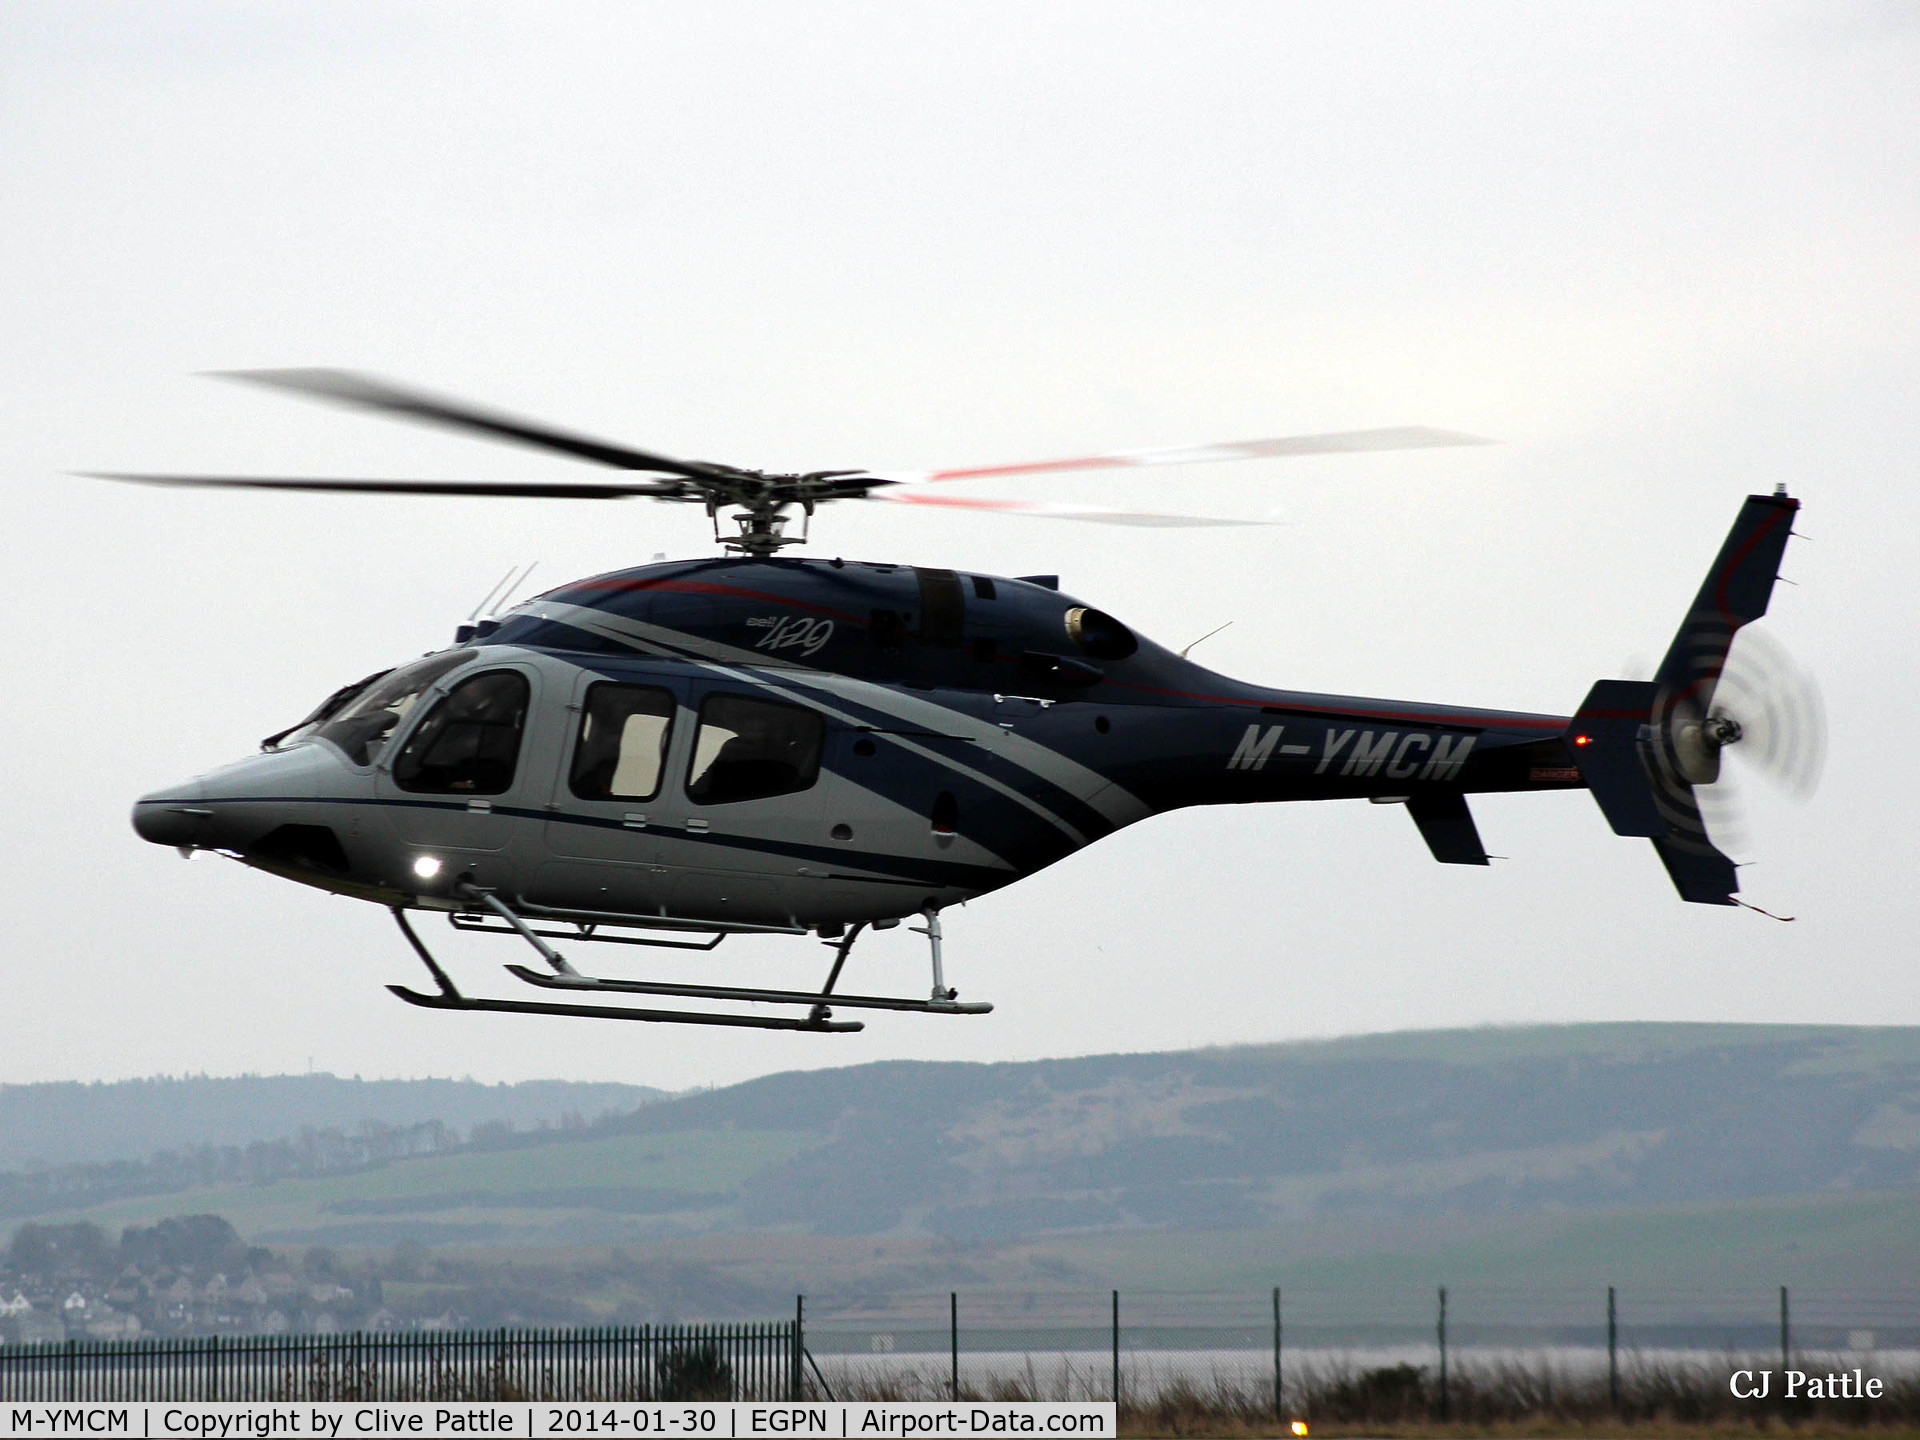 M-YMCM, 2012 Bell 429 GlobalRanger C/N 57107, Hover taxi at Dundee